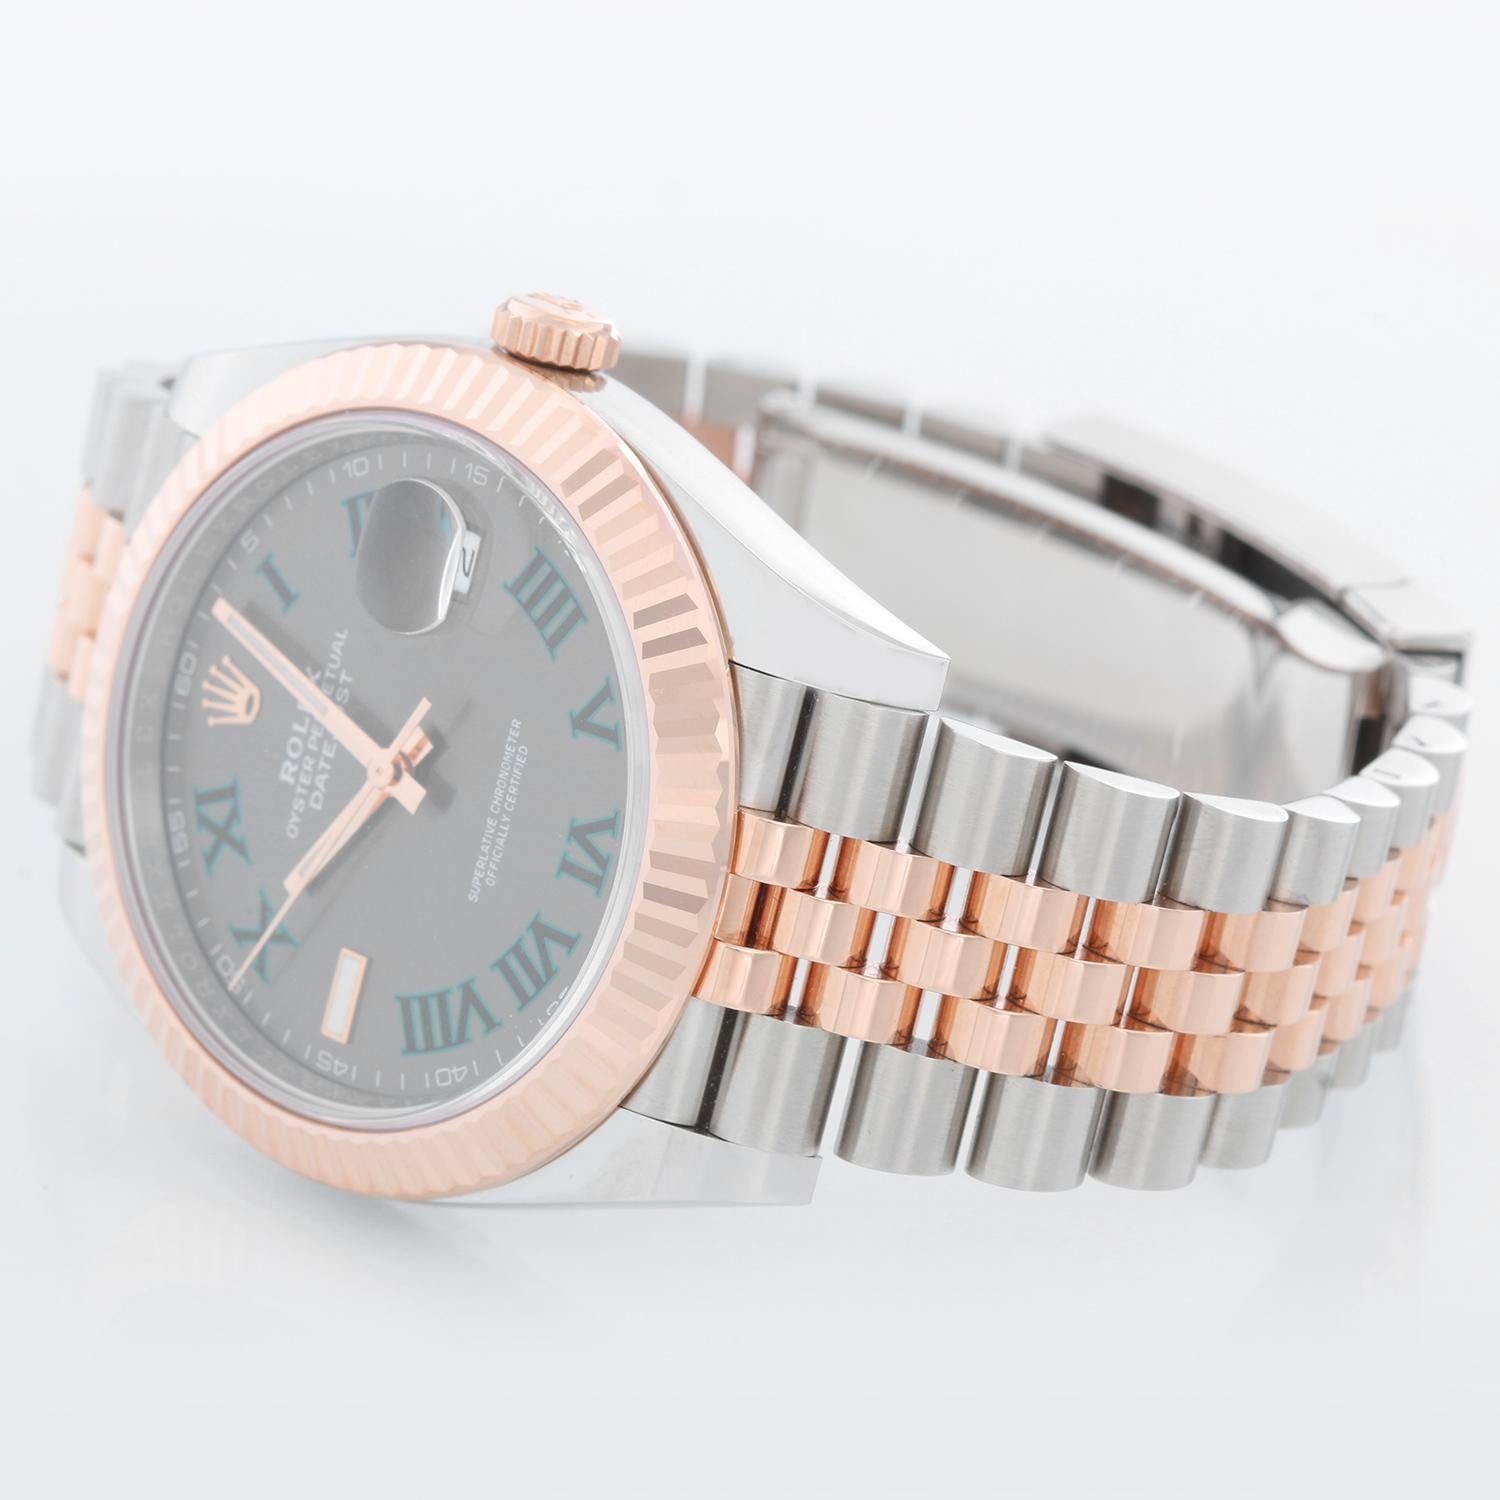 Rolex Datejust II  Men's 2-Tone Steel & Rose Gold 41mm Watch 126331 - Automatic winding, Quickset, sapphire crystal. Stainless steel case with 18k rose gold fluted bezel  (41mm diameter). Grey dial with green Roman  numerals; Wimbledon dial.